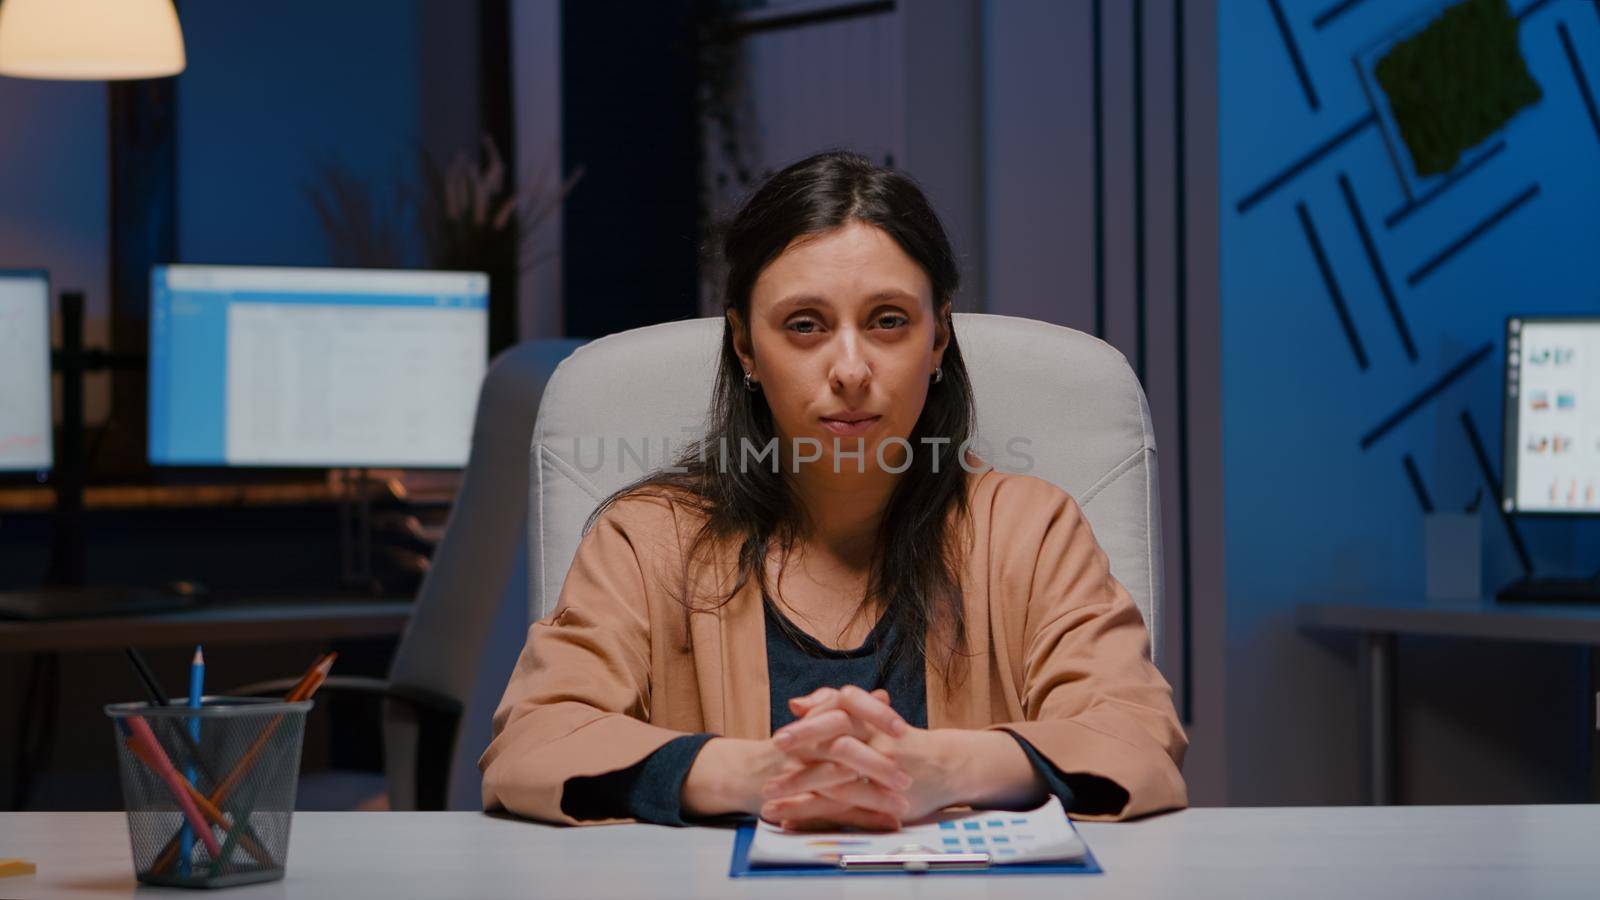 Pov of exhausted businesswoman talking with remote business team discussing marketing project deadline during online videocall conference meeting. Tired entrepreneur working in startup company office